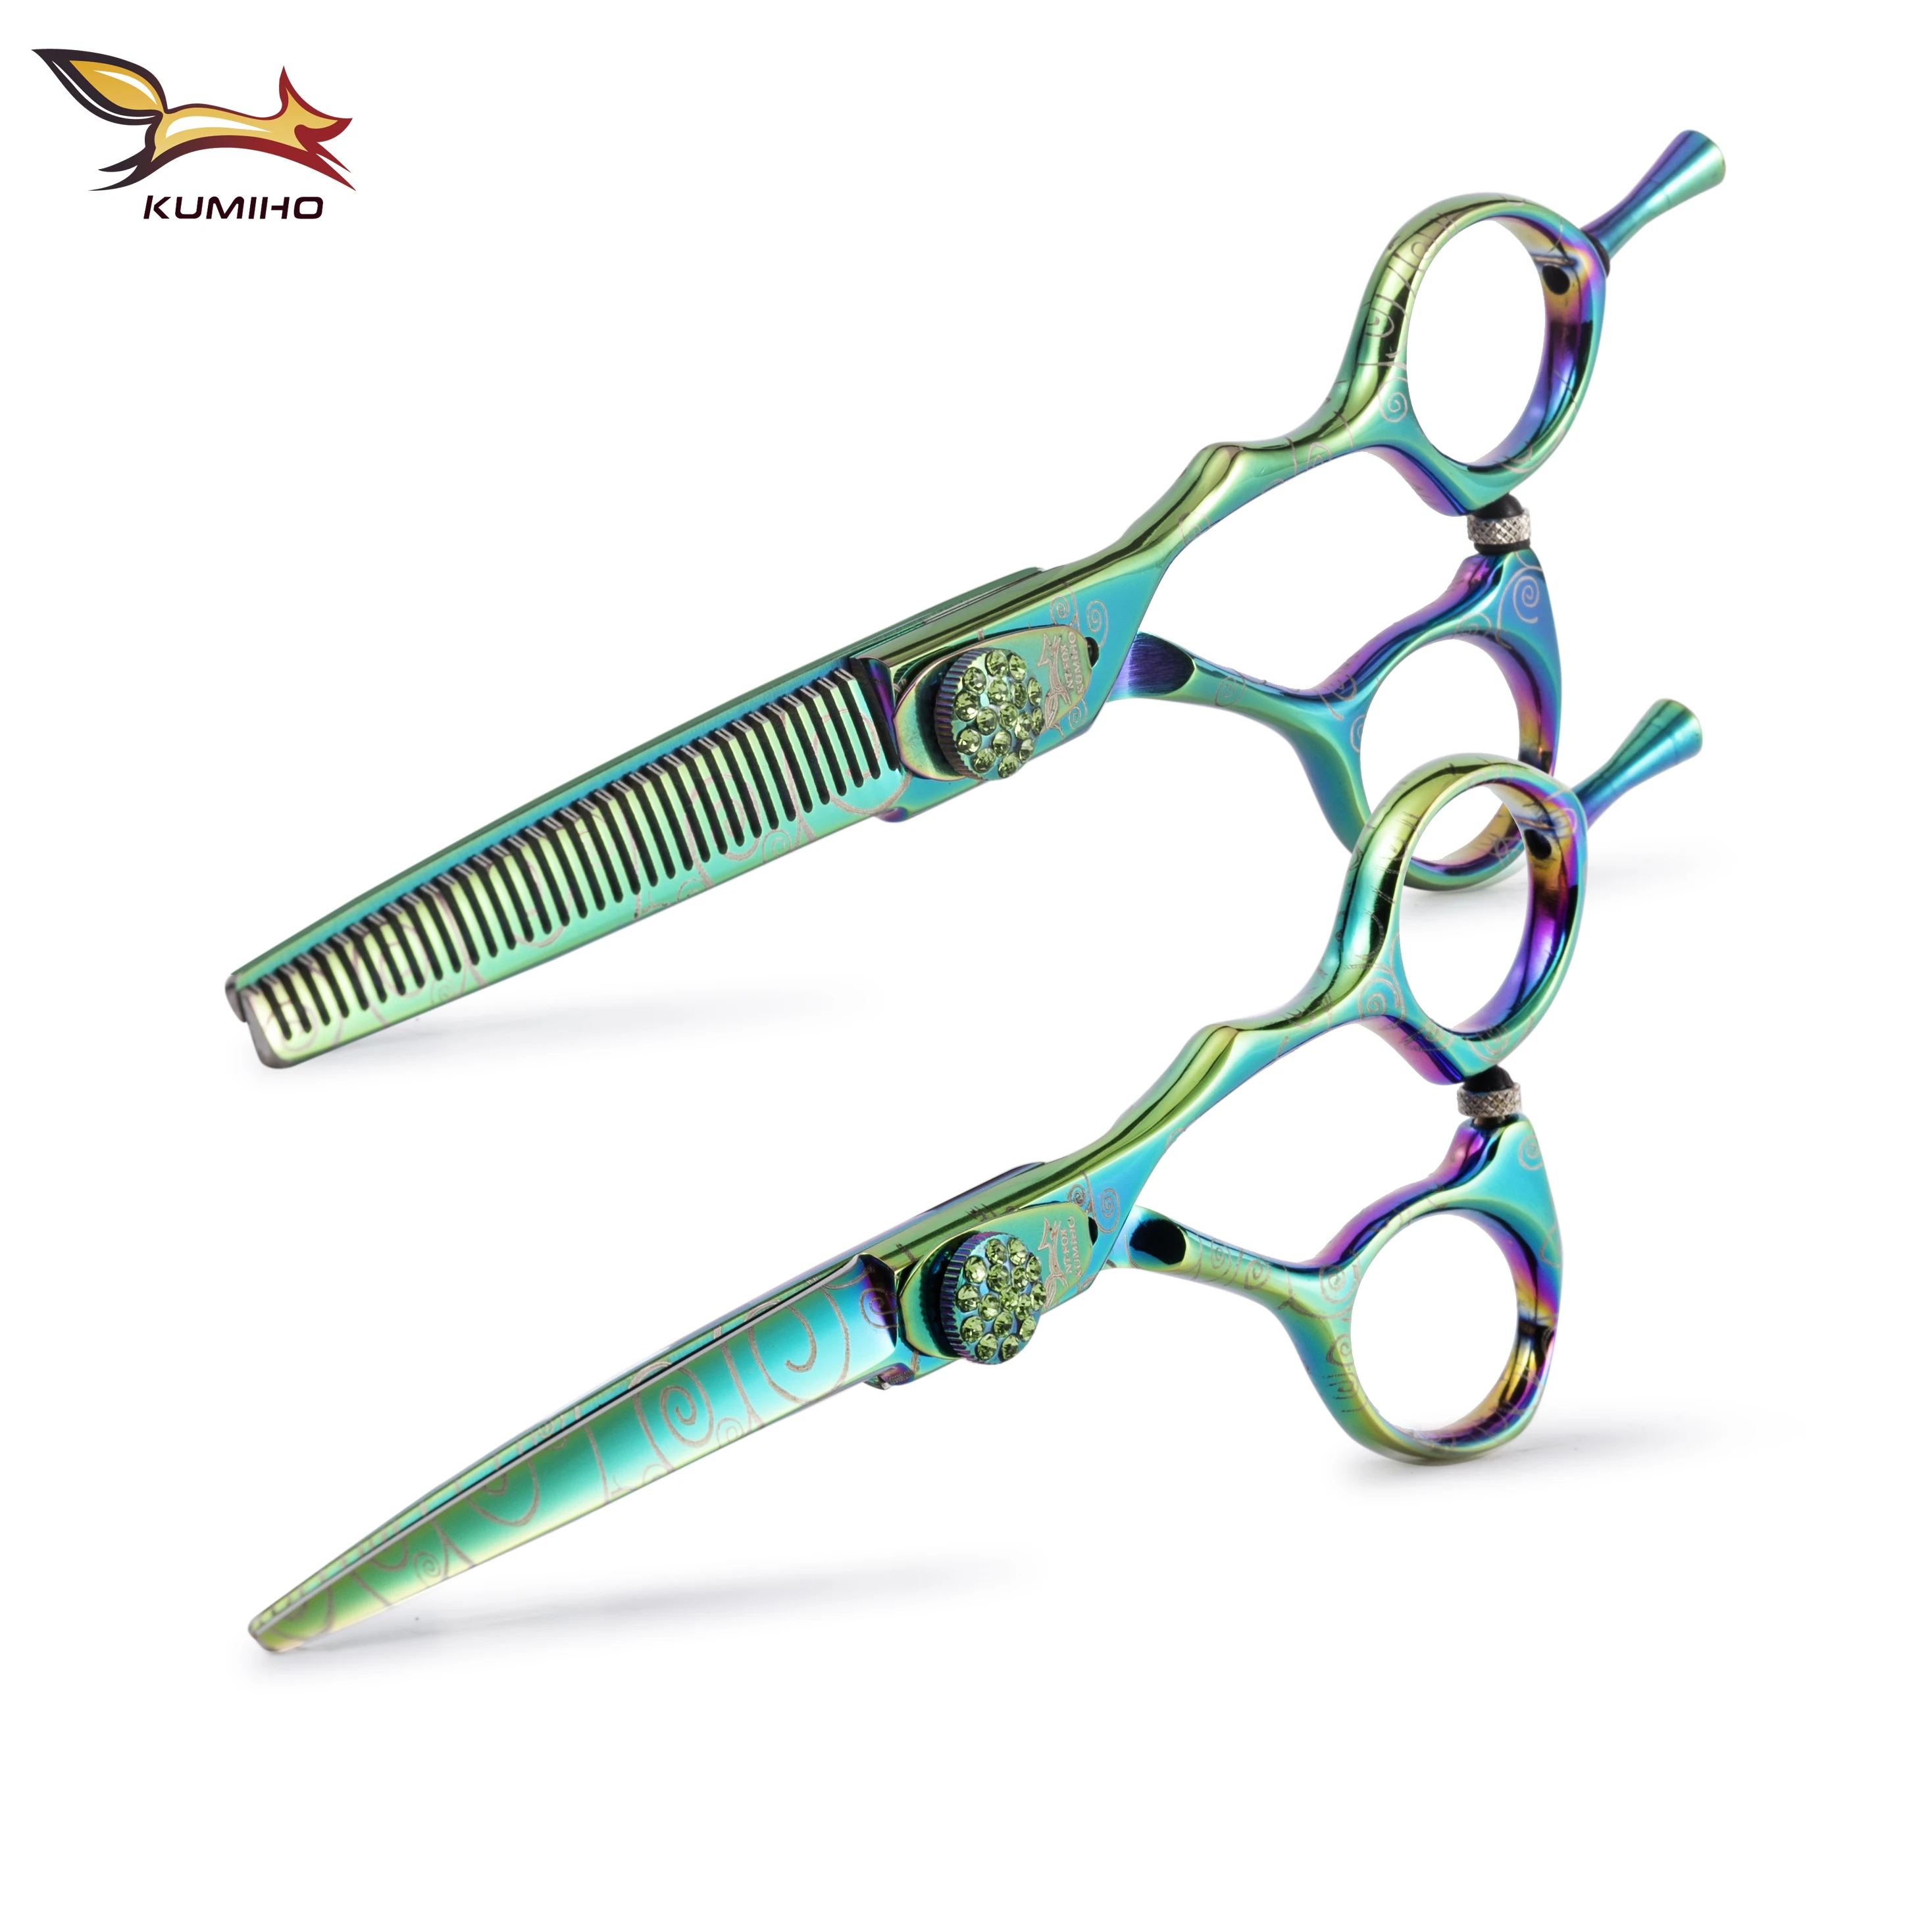 

2019 KUMIHO CLQ-60 New Arrival hair scissors set 6inch colorful hair shear green barber scissors Chinese 440C stainless high, Green titanium